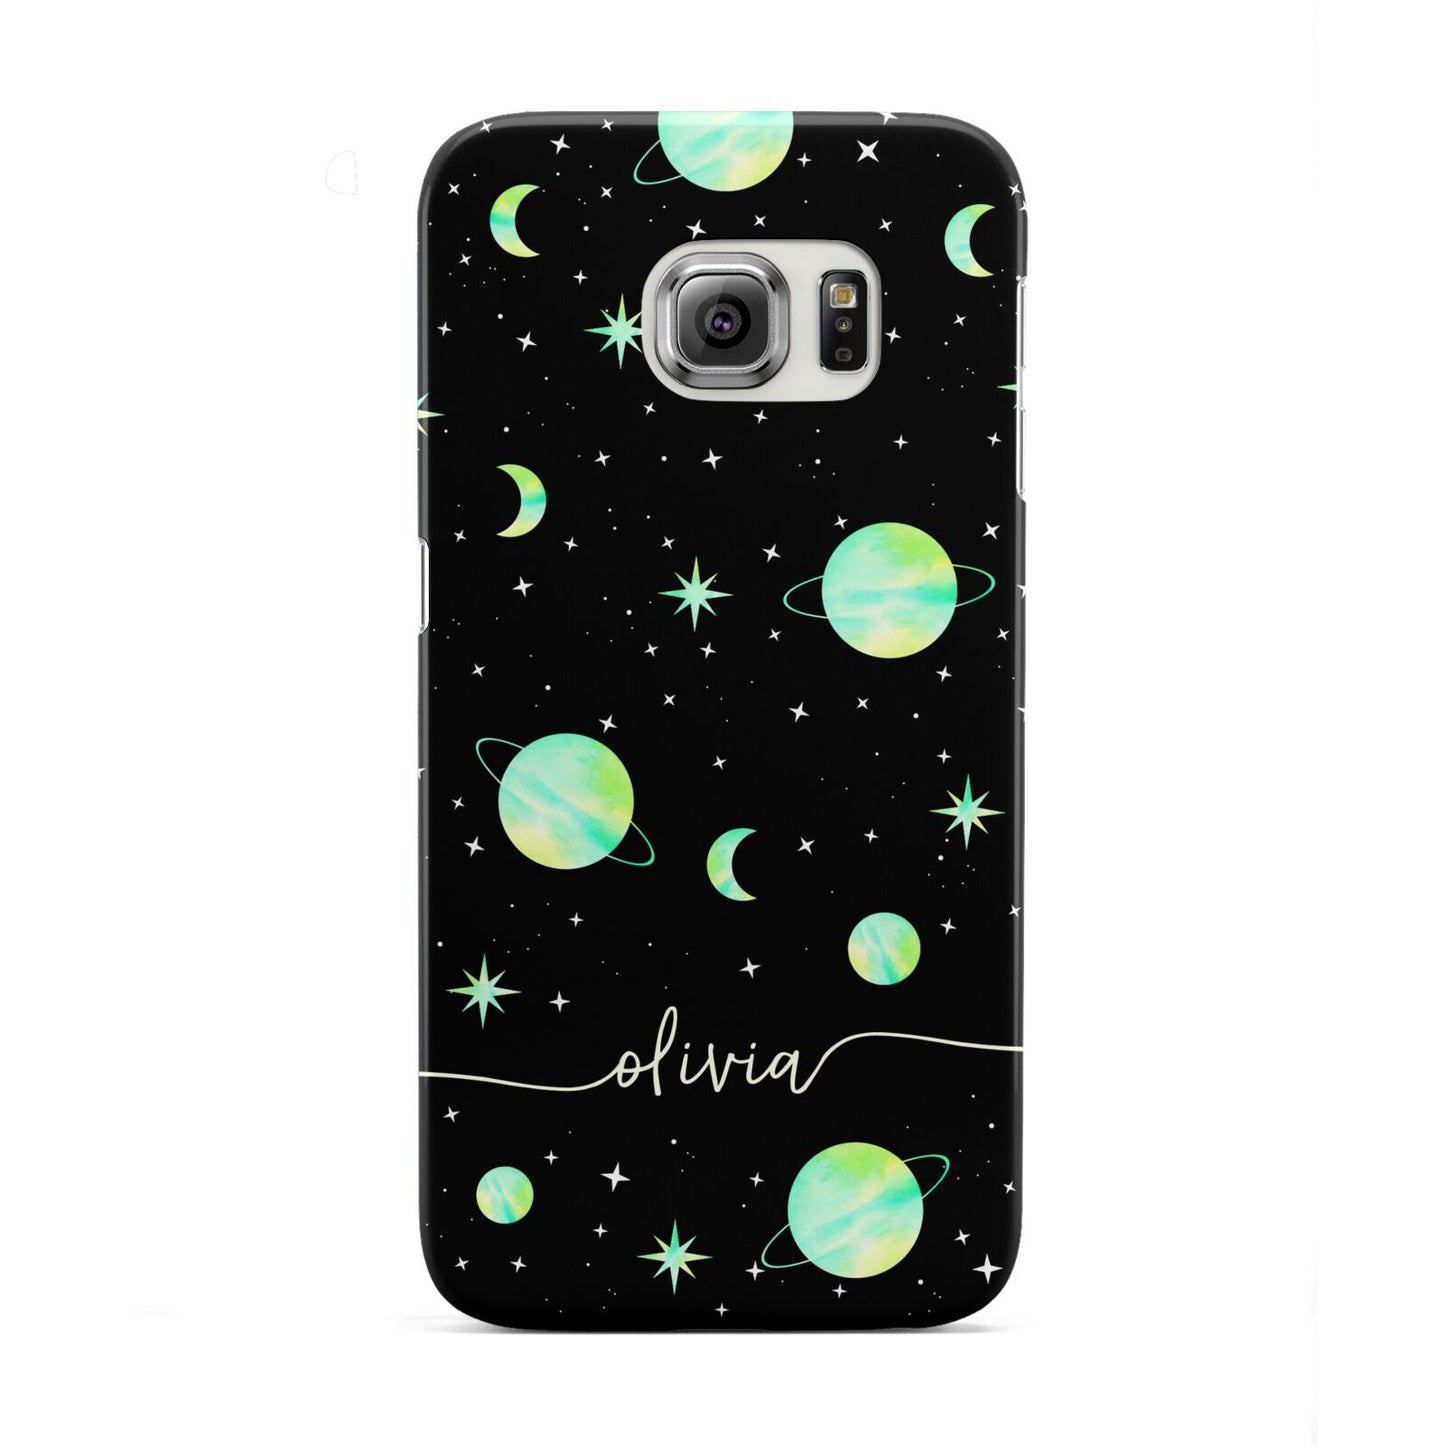 Green Galaxy Personalised Name Samsung Galaxy S6 Edge Case